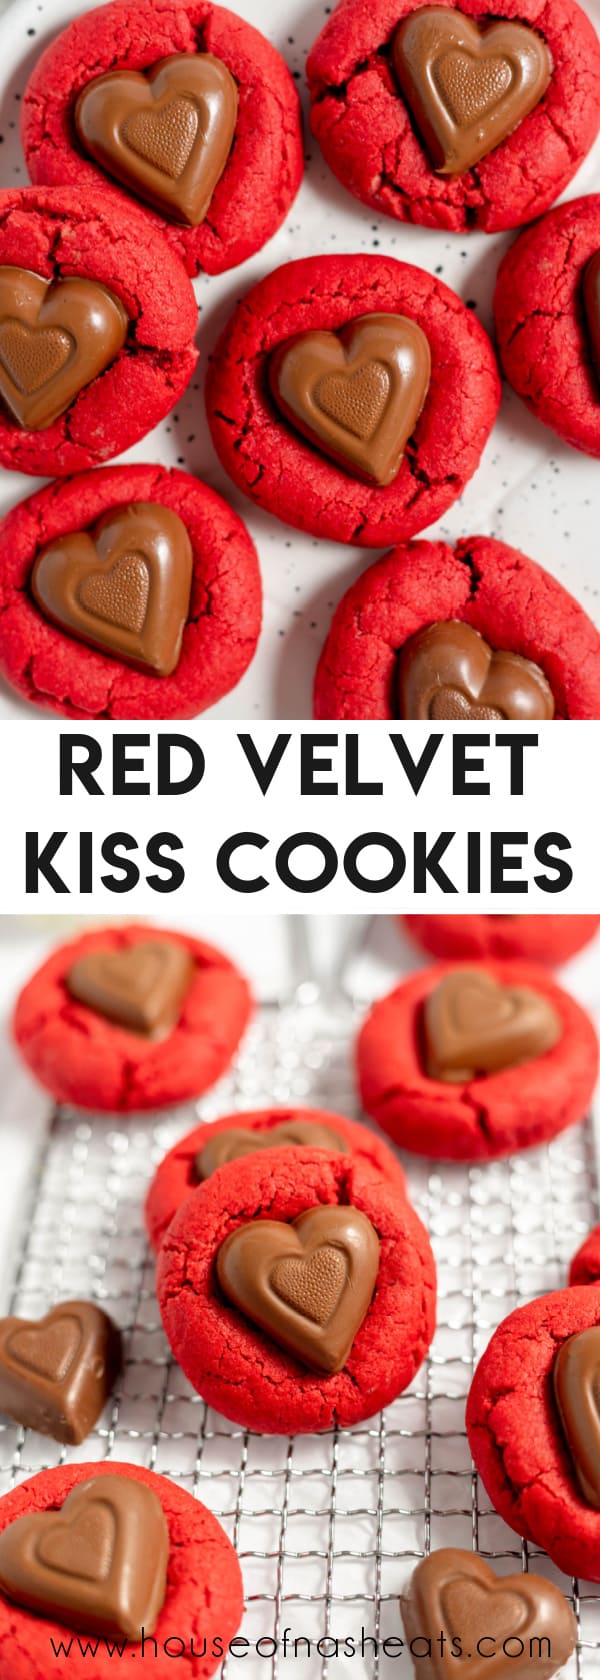 A collage of images of red velvet kiss cookies with text overlay.